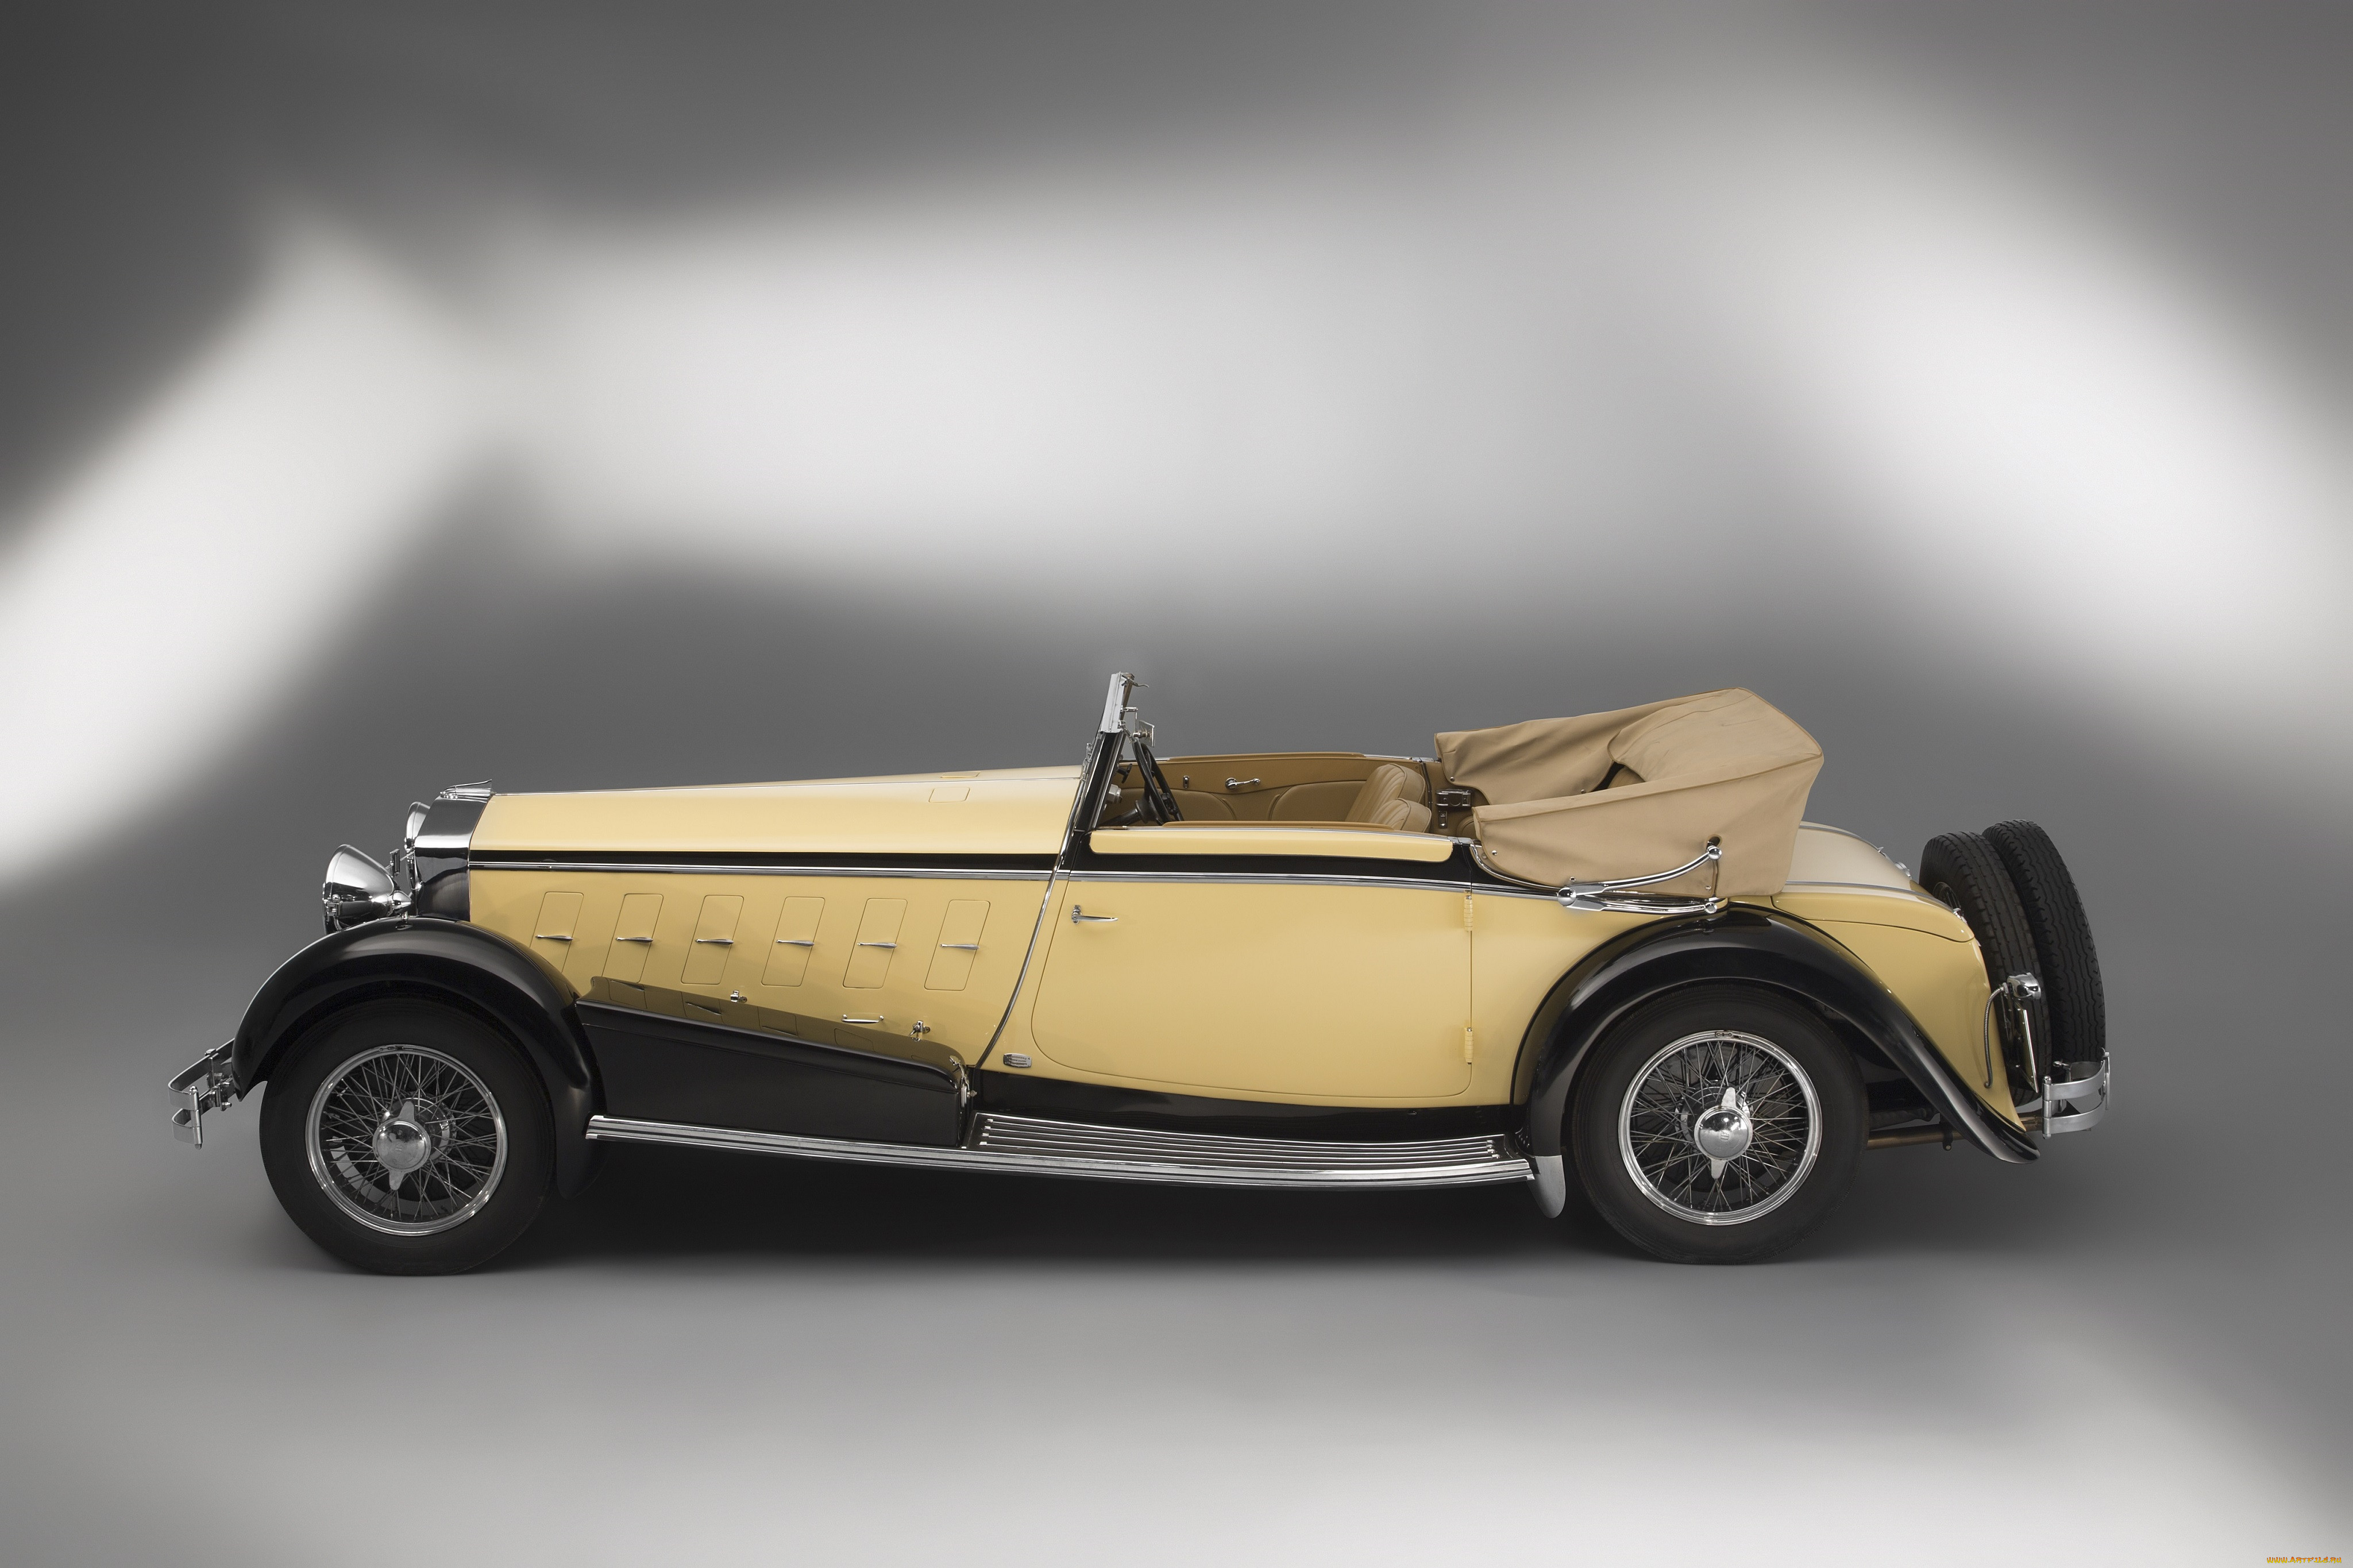 isotta-fraschini tipo 8a cabriolet by ramseier, , , isotta